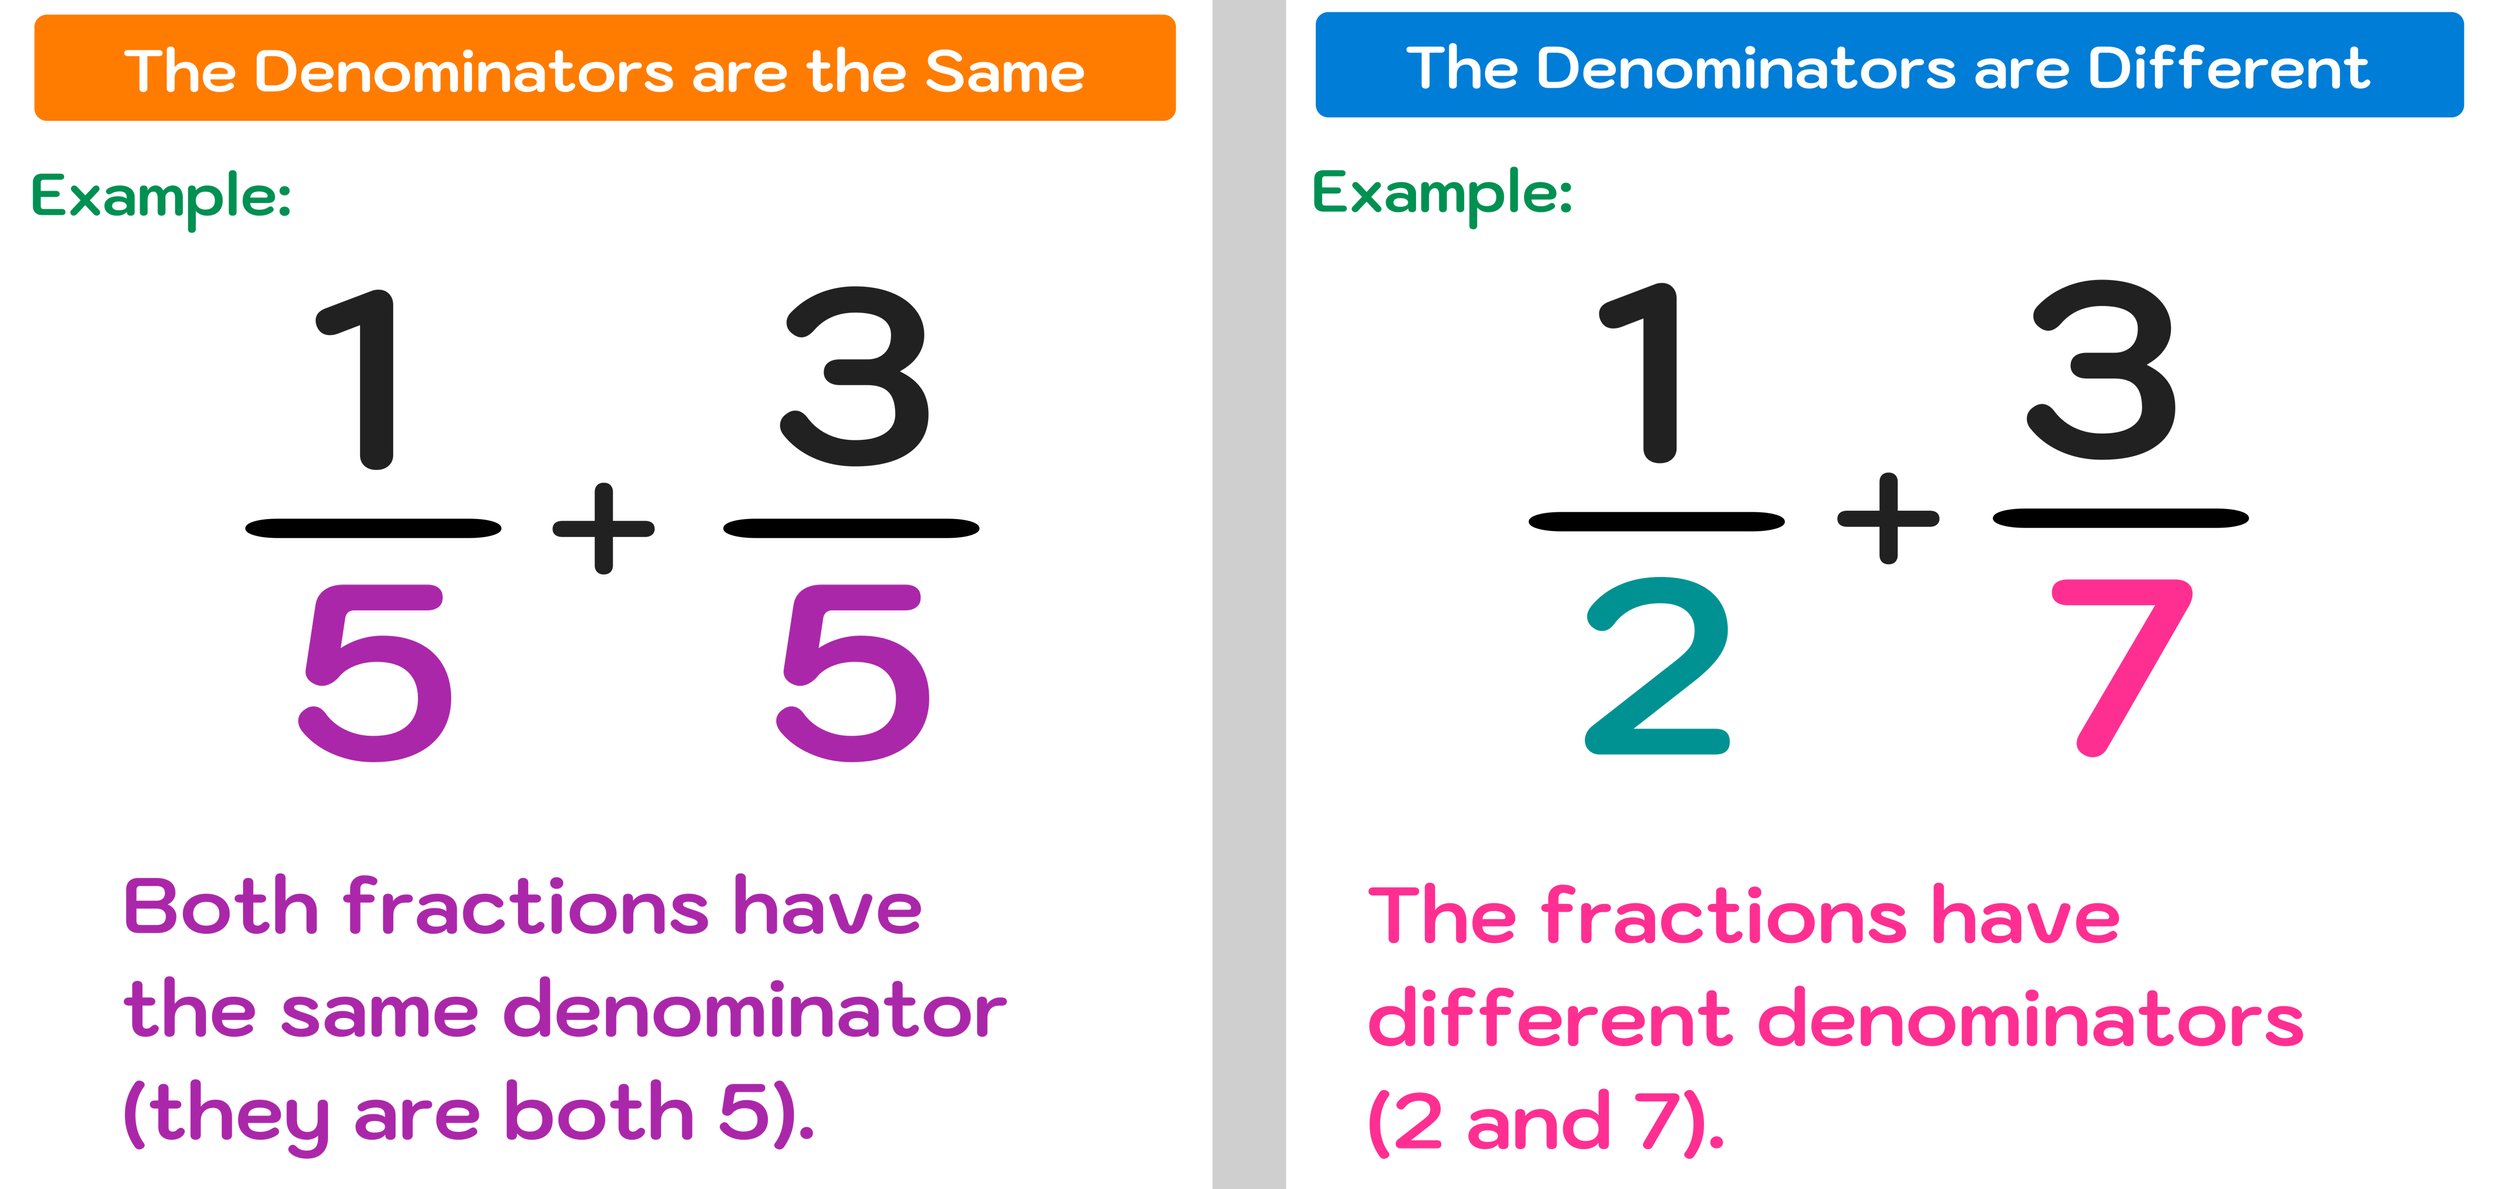 How To Add Fractions In 3 Easy Steps — Mashup Math